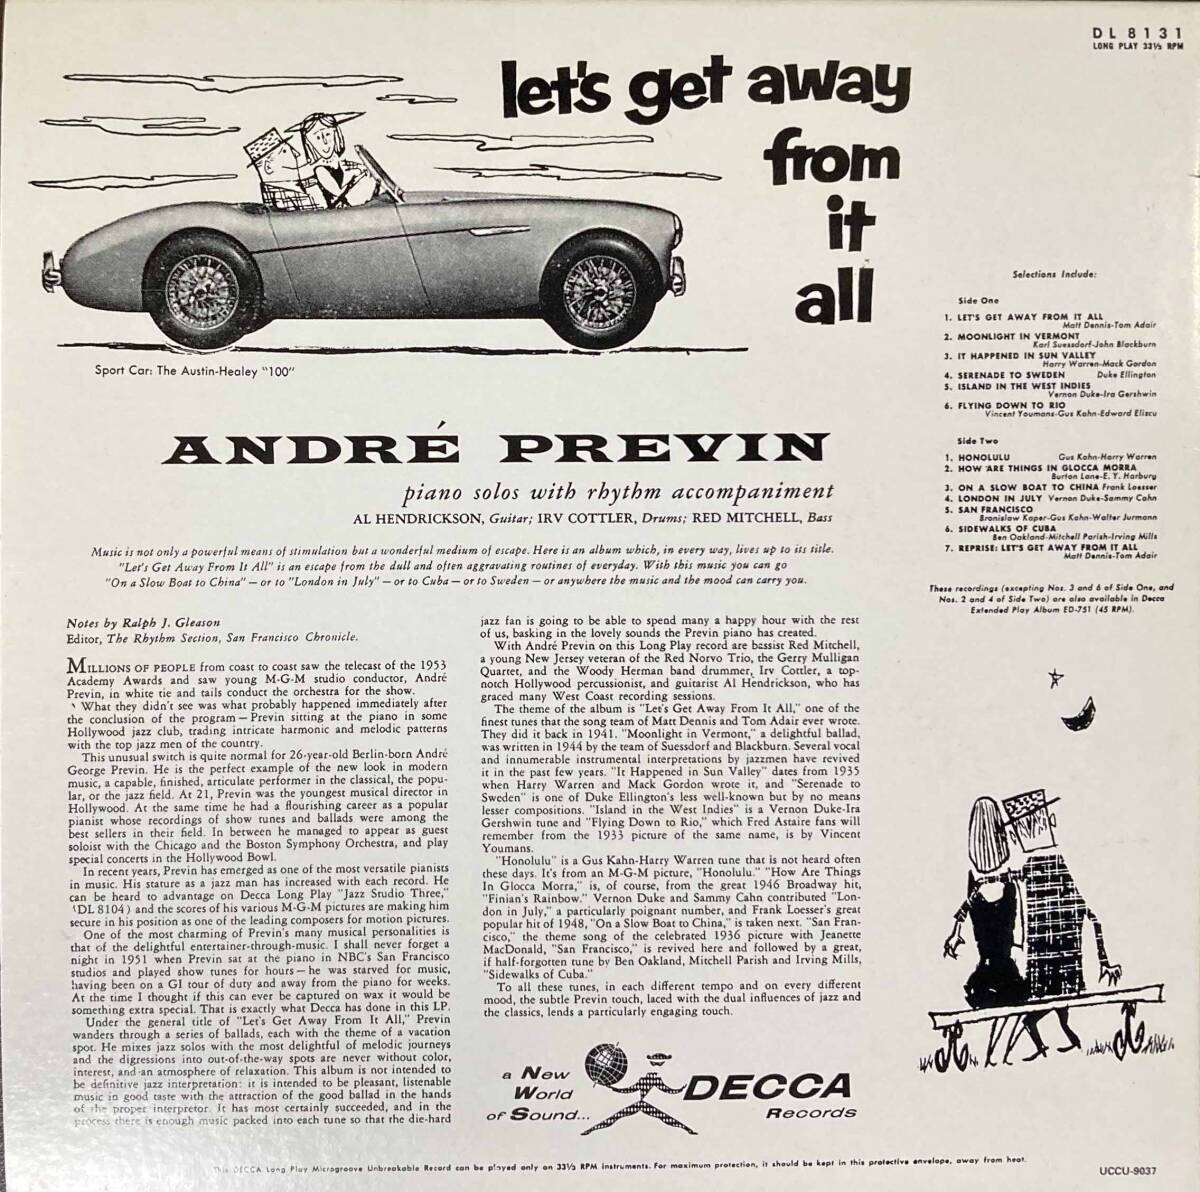 Andre Previn / Let's Get Away from It All 中古CD　国内盤　帯付き 紙ジャケ　24bitリマスタリング　初回プレス完全限定盤　世界初CD化_画像2